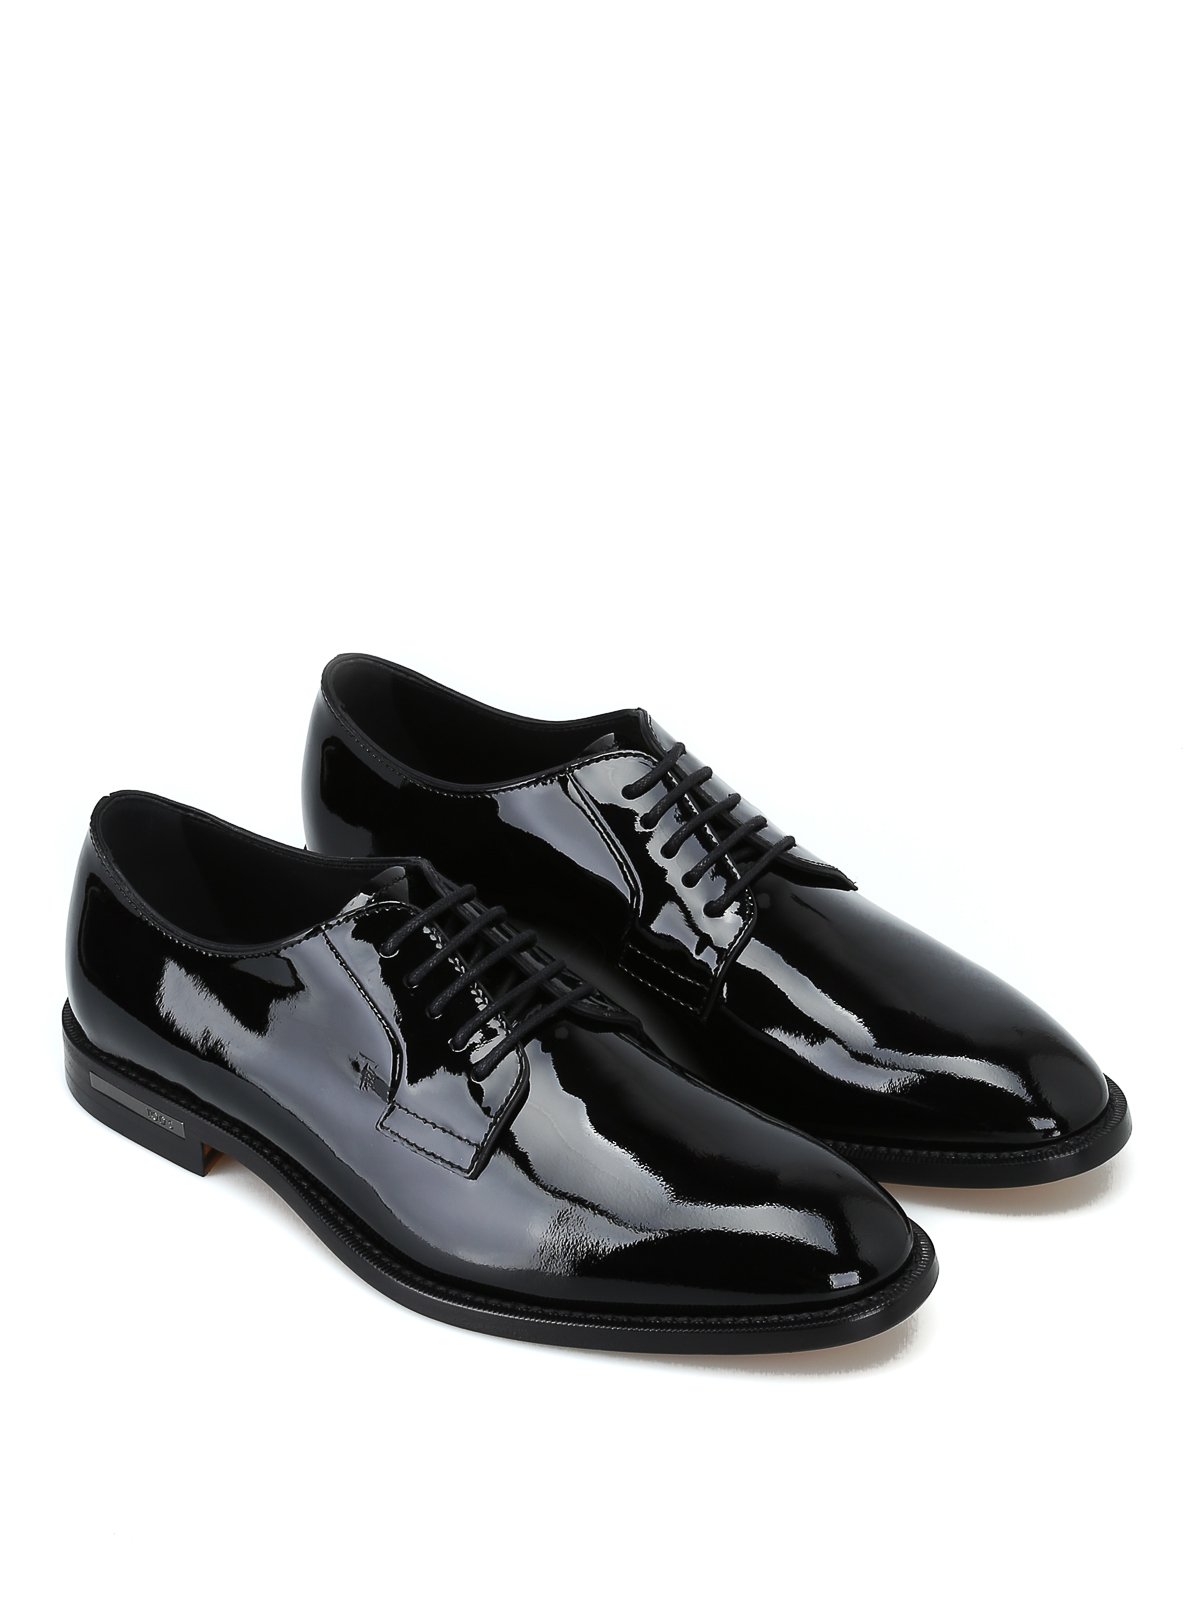 black patent leather lace up shoes